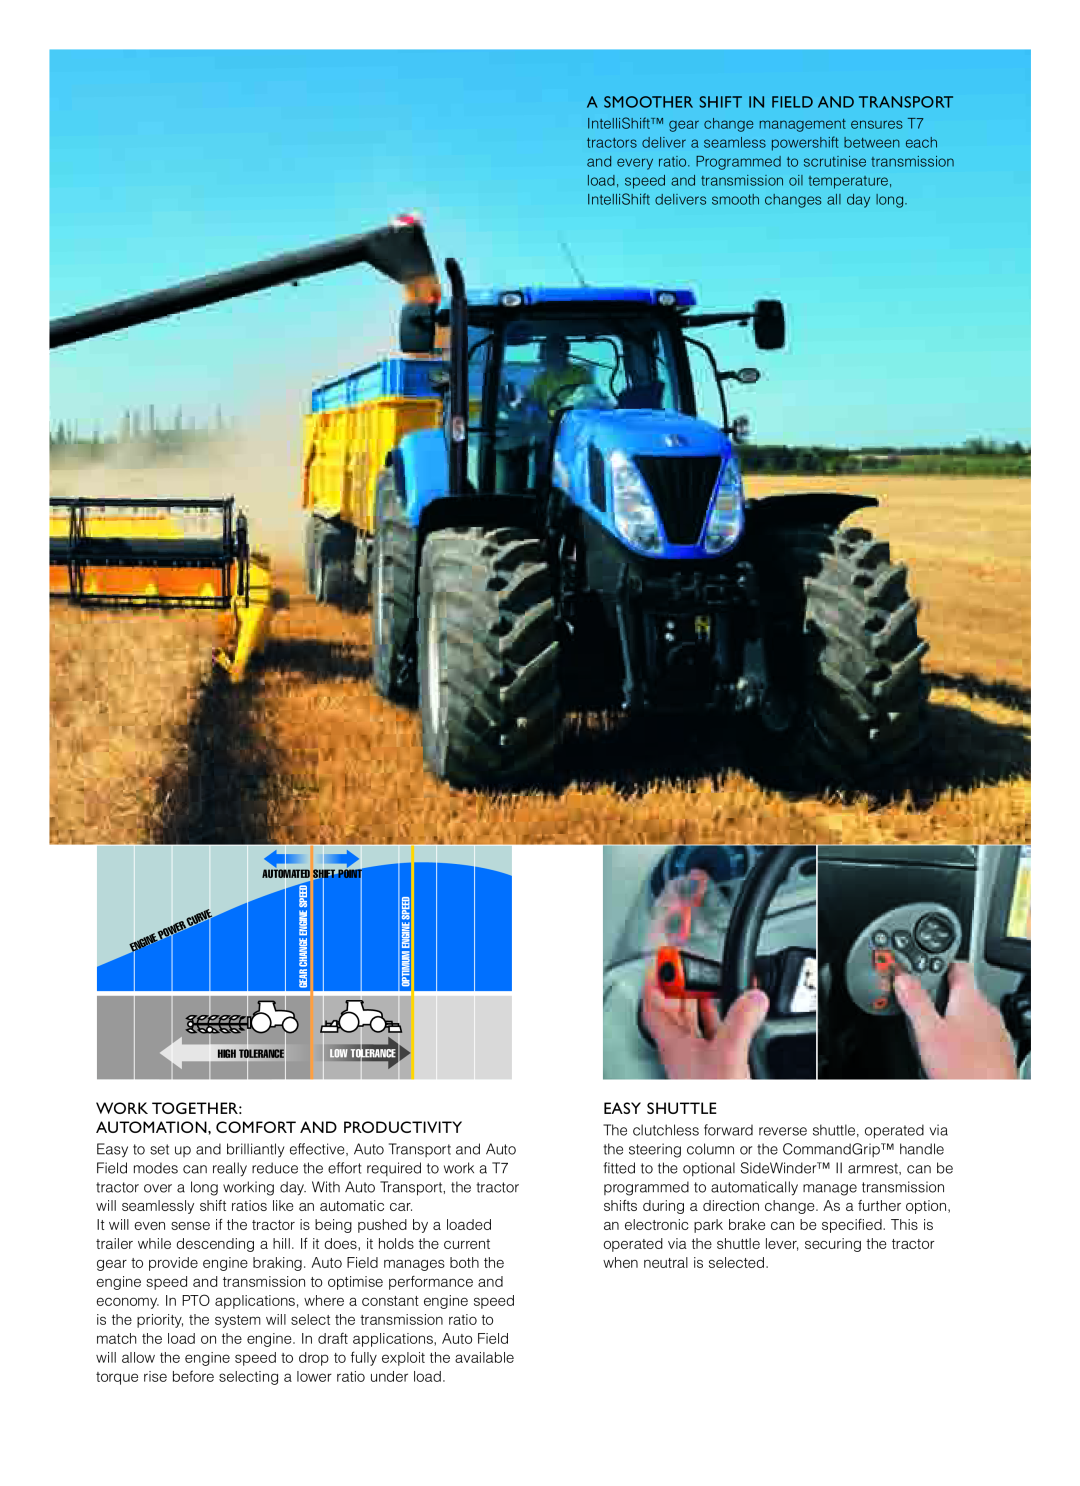 New Holland T7.170, T7.270 A Smoother Shift In Field And Transport, Work Together Automation, Comfort And Productivity 